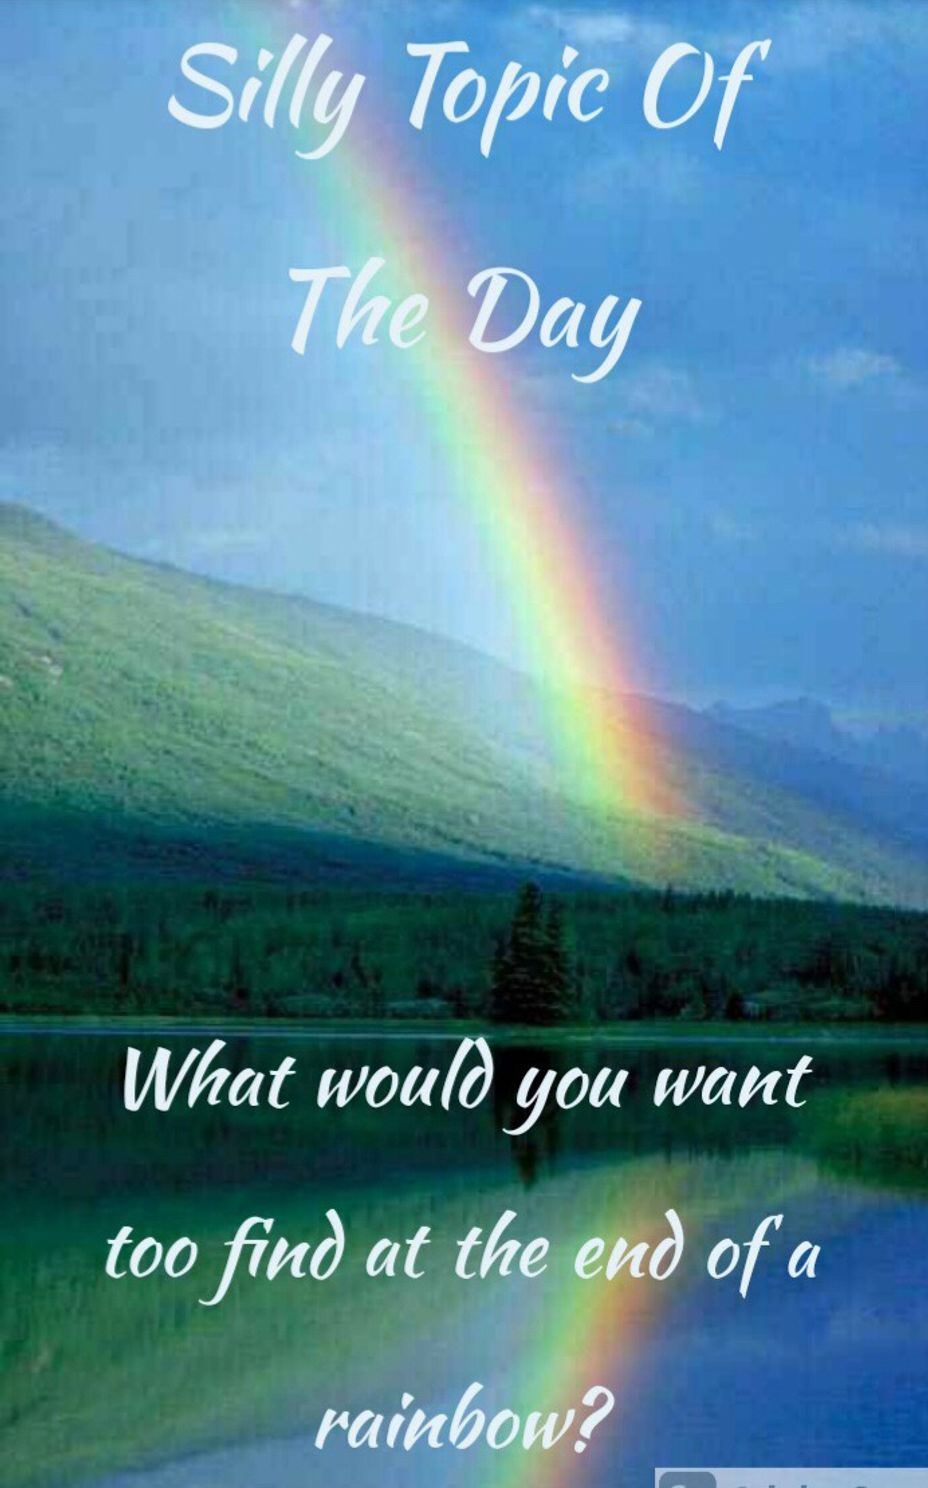 <p>🌈Silly Topic Of The Day🌈 What would you want to find at the end of a rainbow?🌈</p>